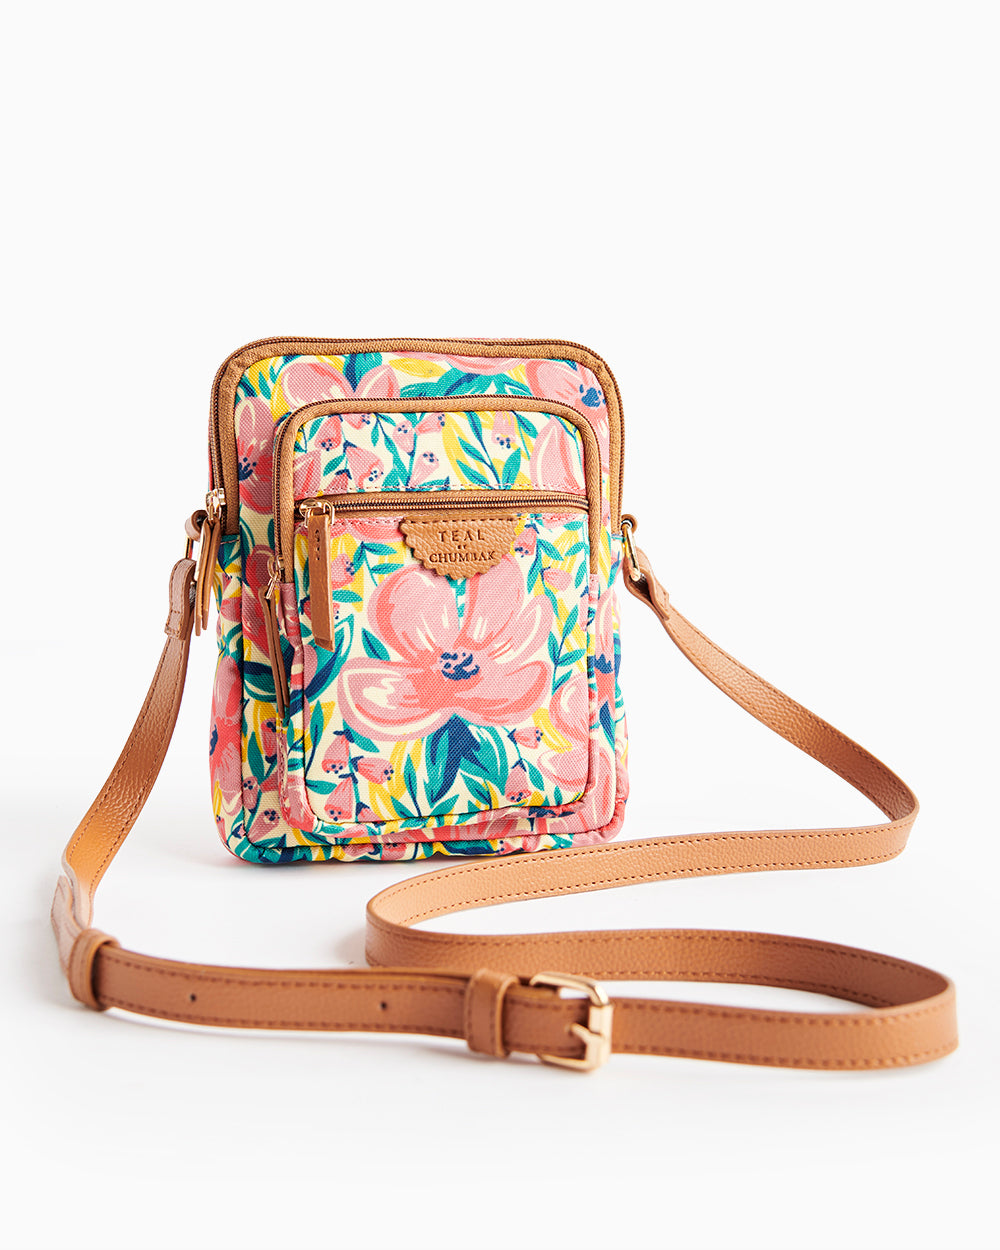 TEAL BY CHUMBAK Floral Structured Sling Bag